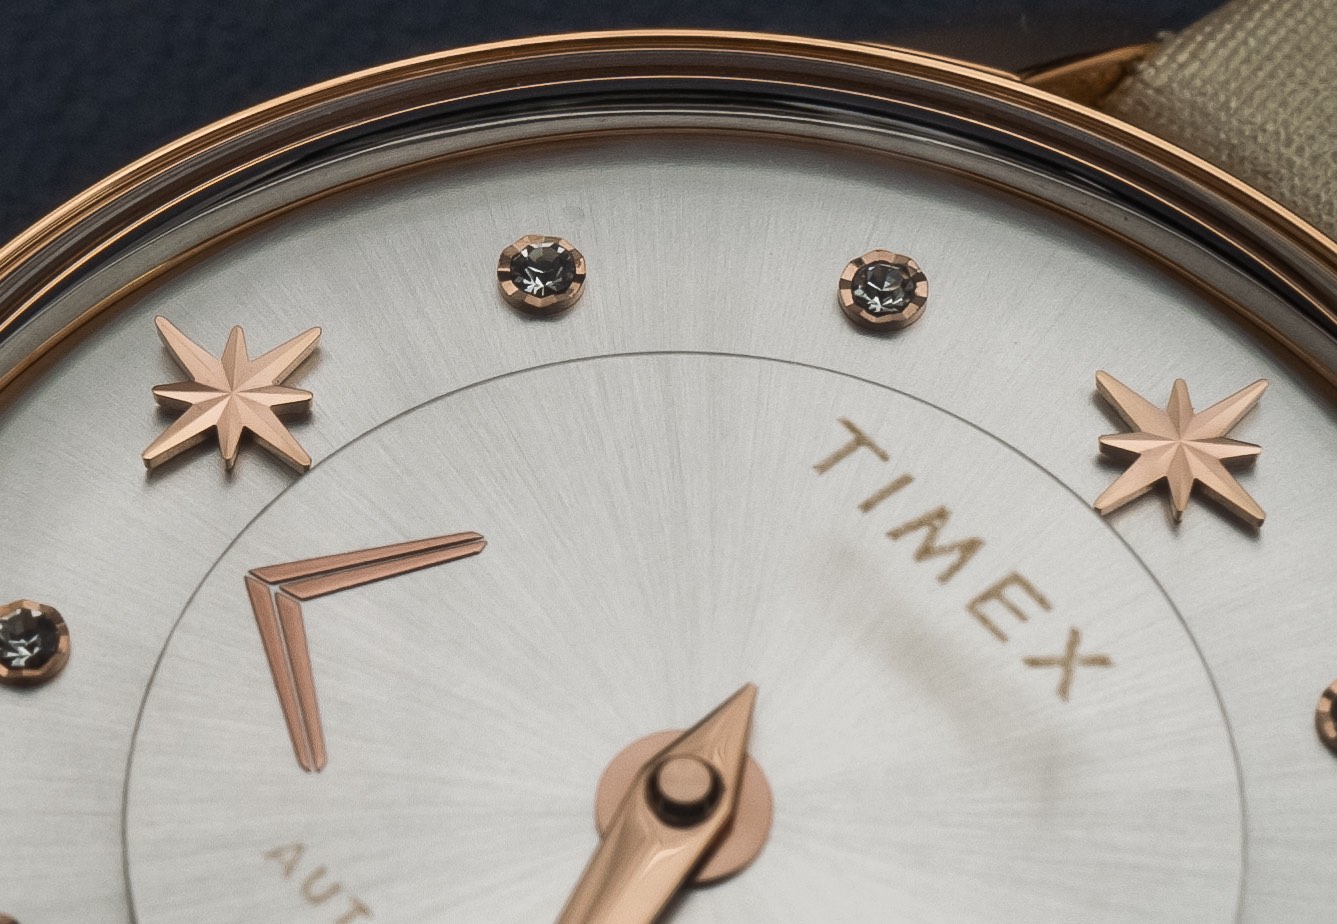 Timex Celestial Opulence Automatic Women's Watch Collection 